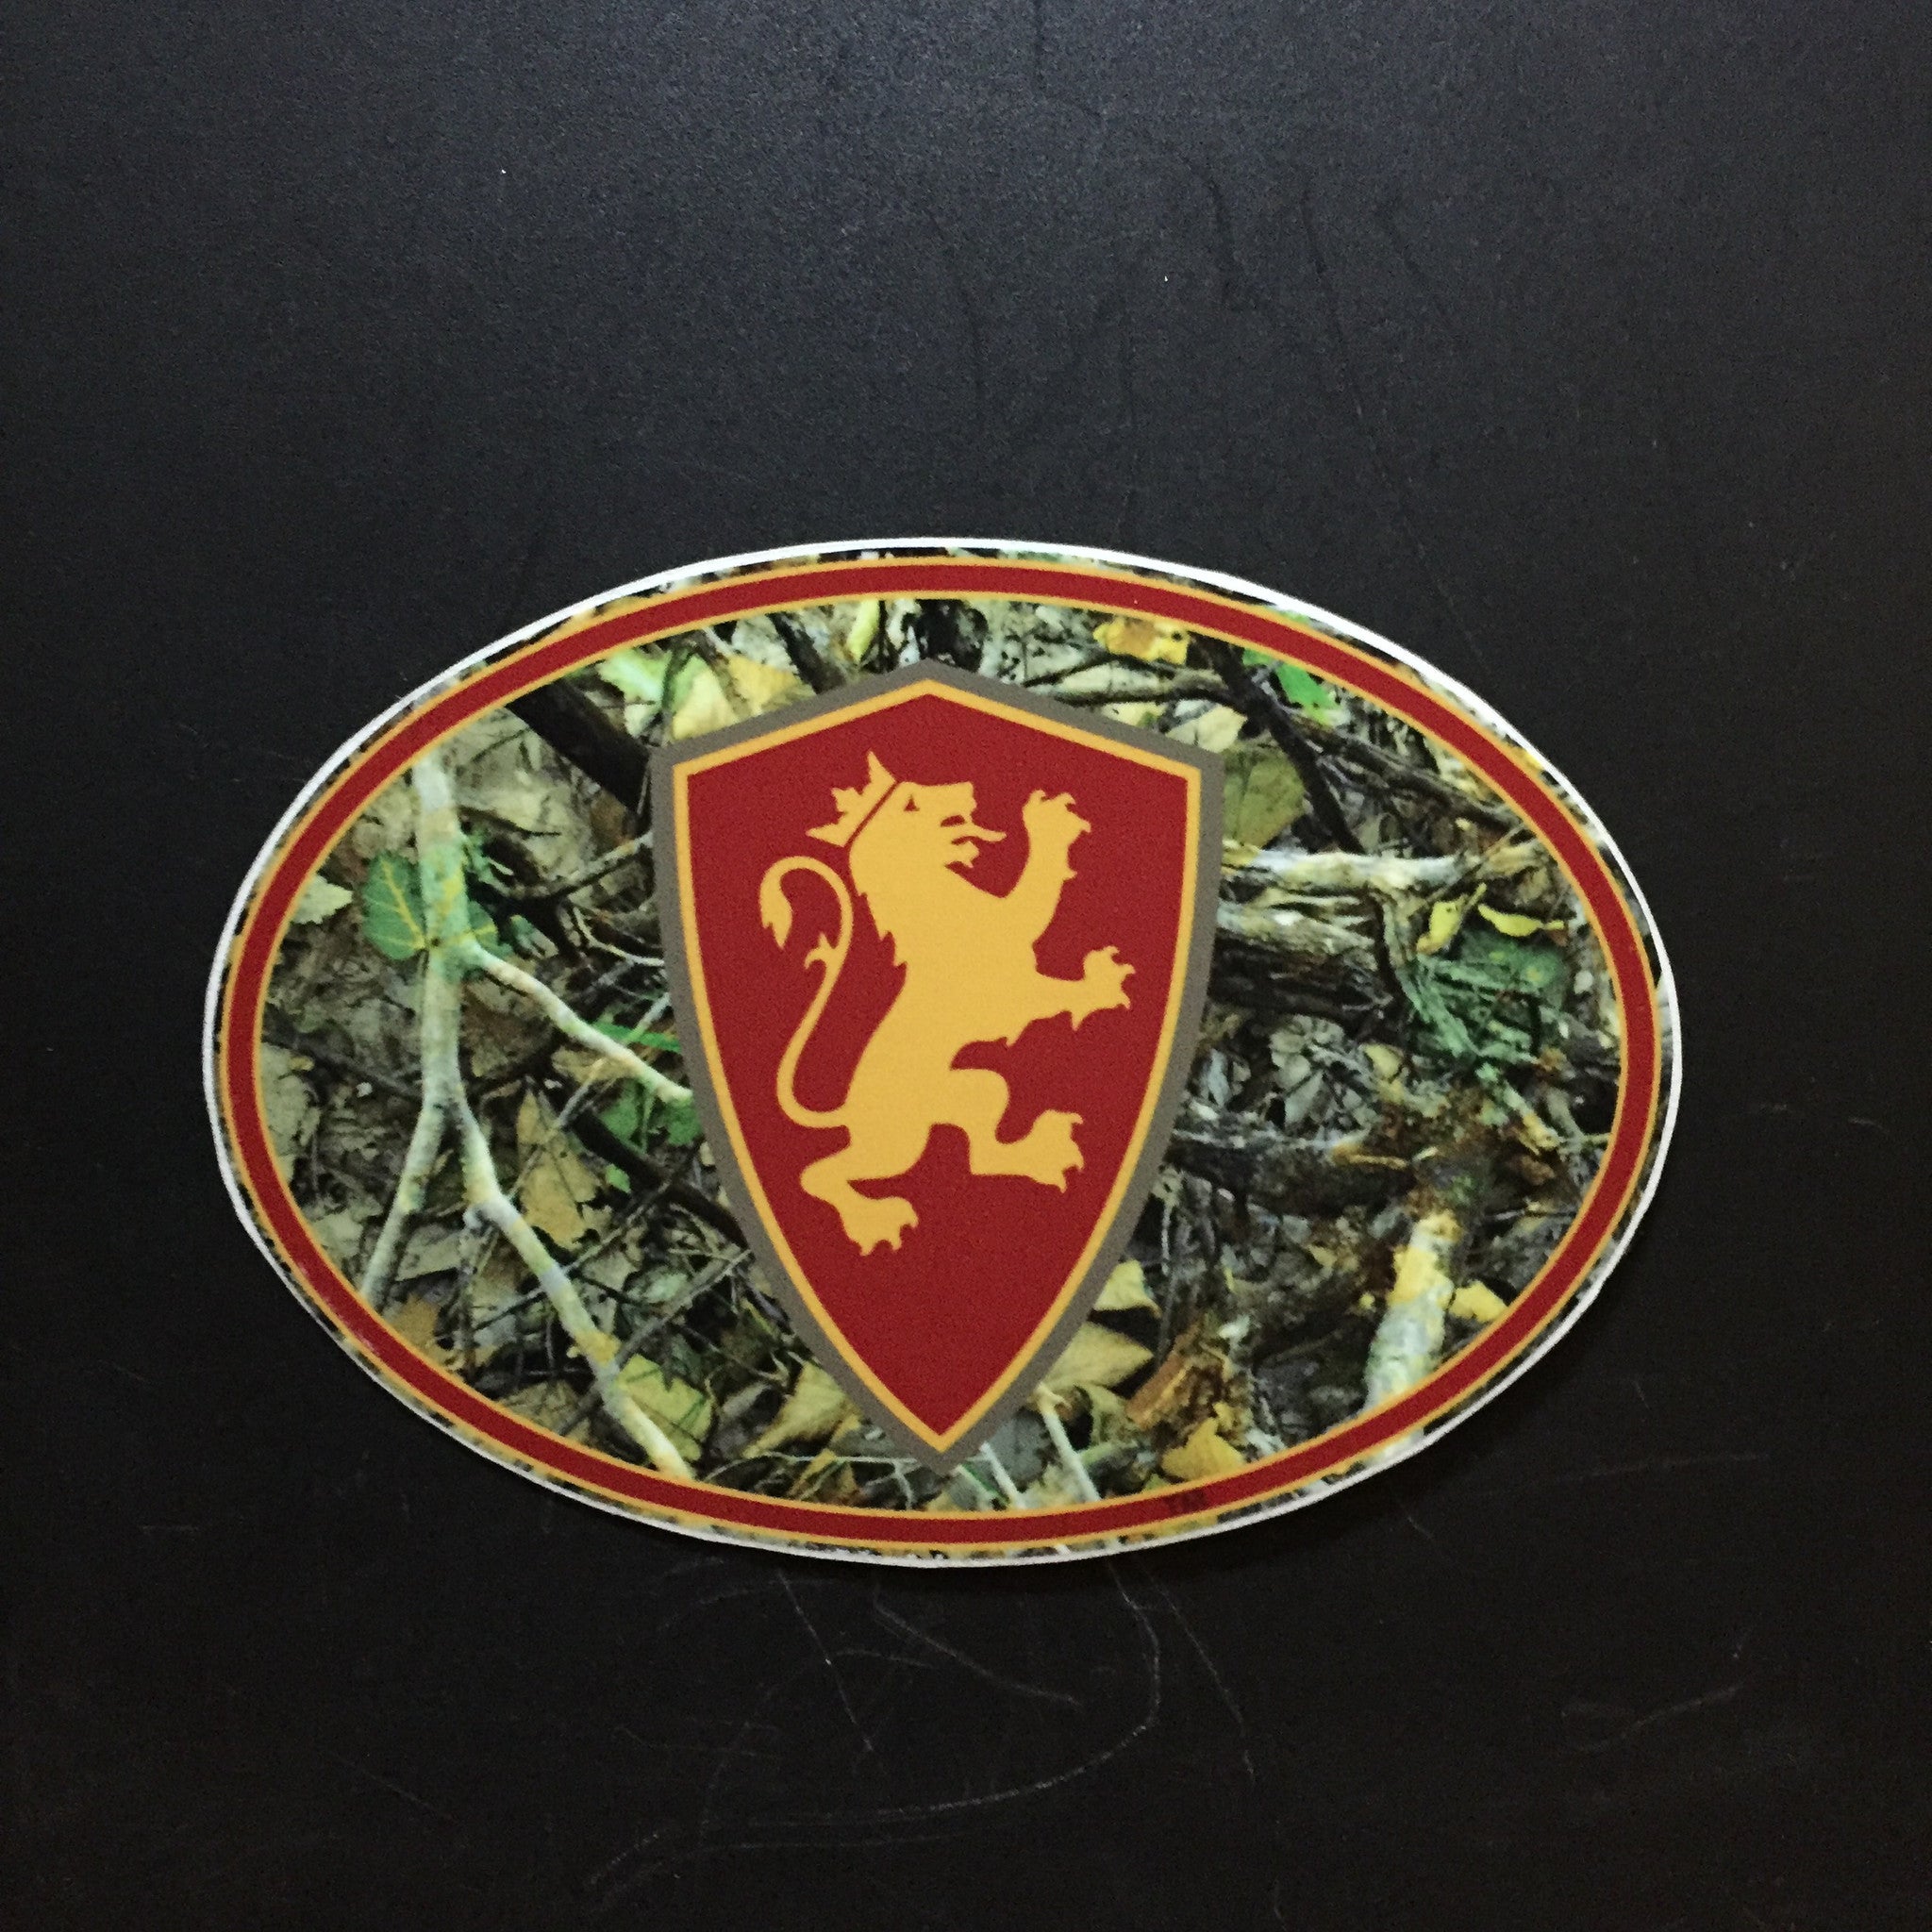 camo oval decal with gold and red lion shield. Oval is outlined in gold and red